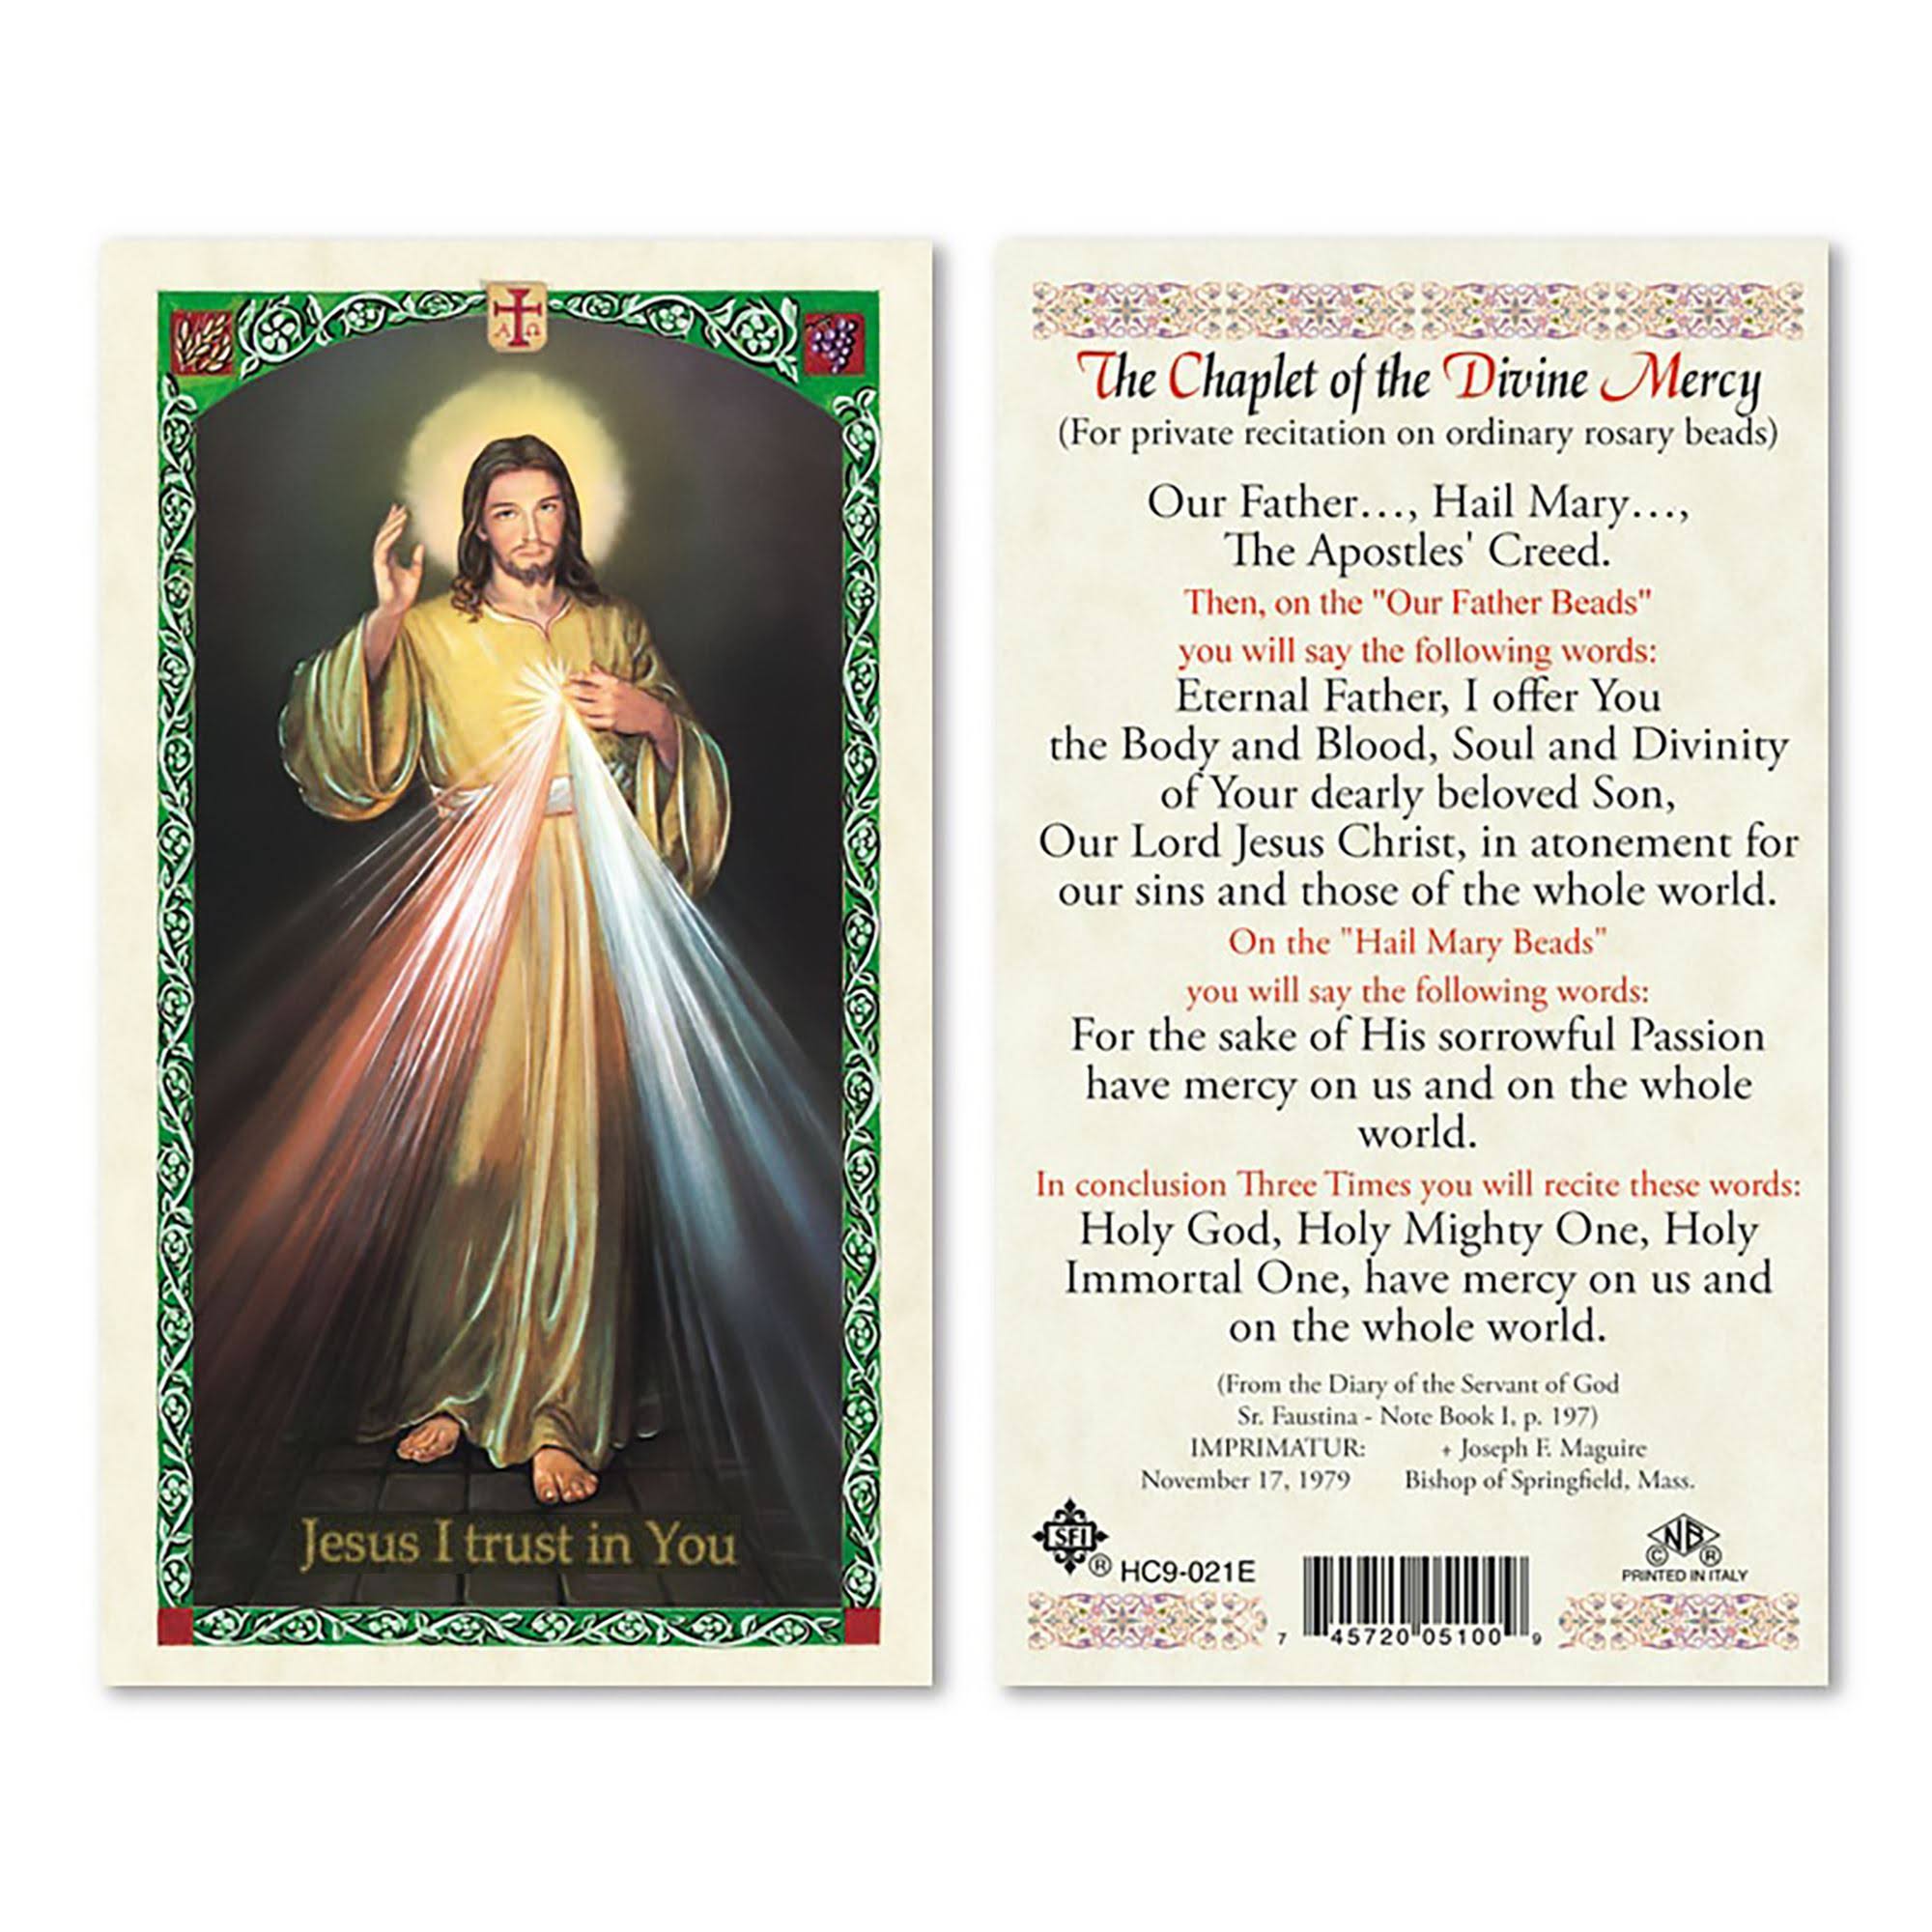 EWTN - Laminated Holy Card The Chaplet of Divine Mercy